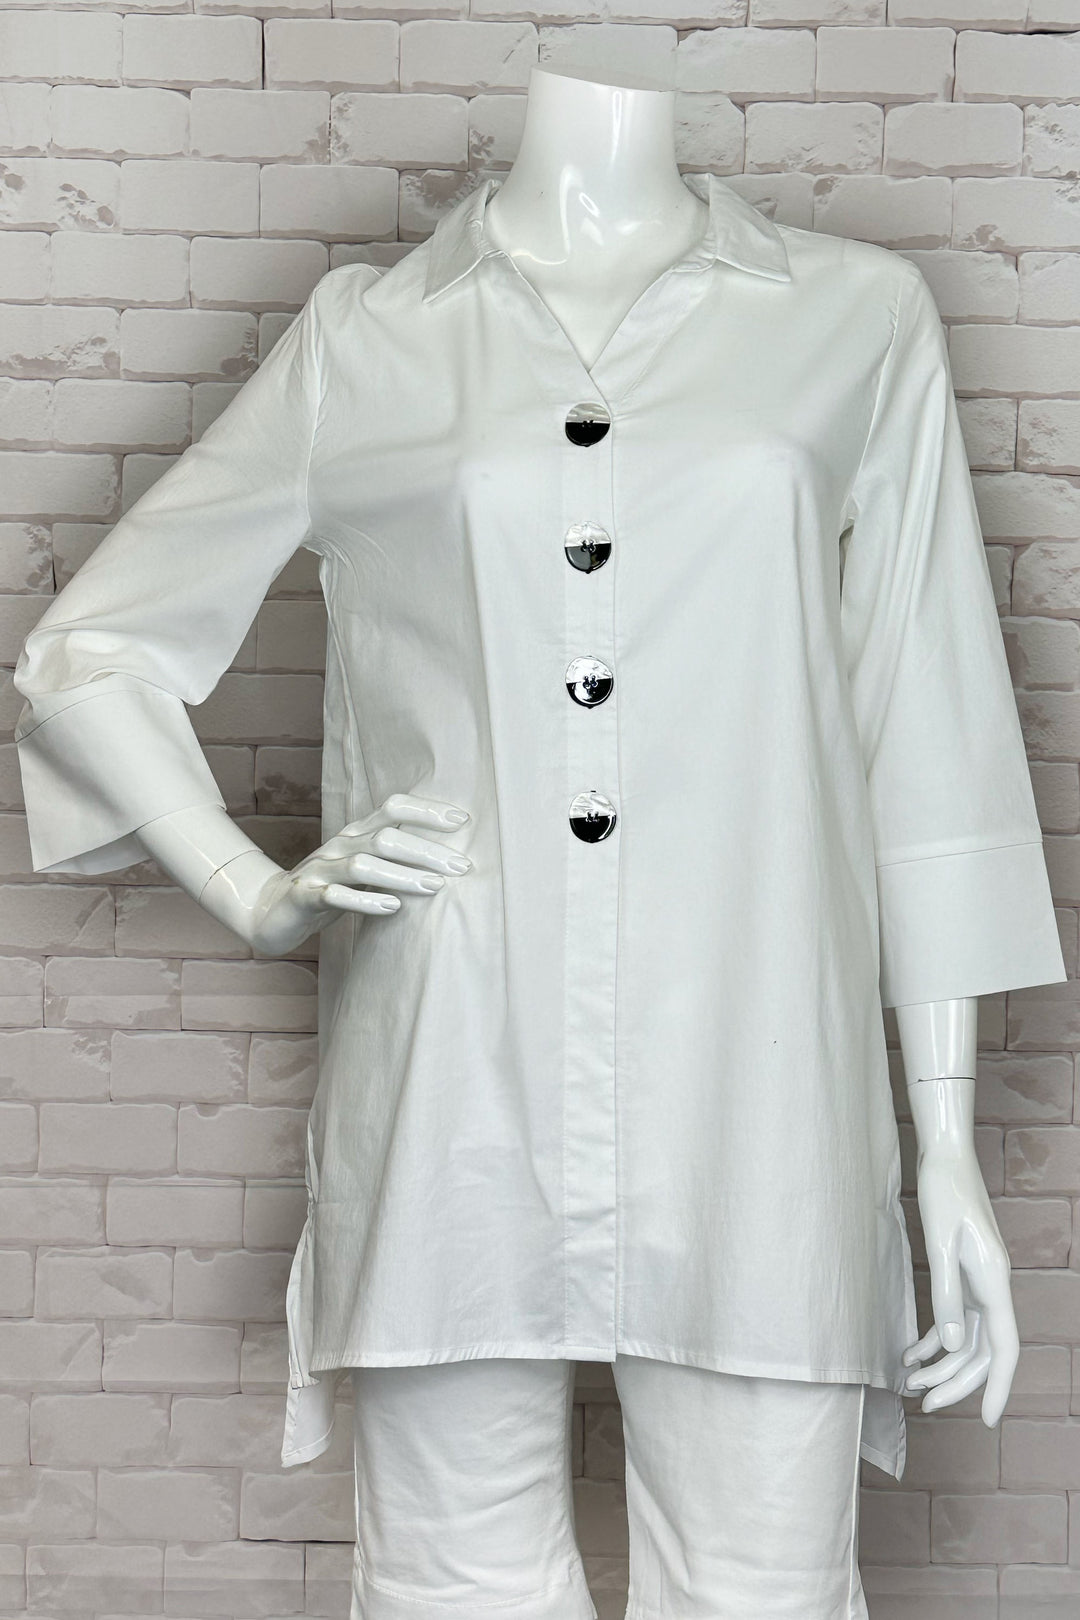 Ever Sassy Spring 2024 It features an A-line silhouette, three-quarter cuffed sleeves, classic collar, 4 silver front buttons and asymmetrical hem.